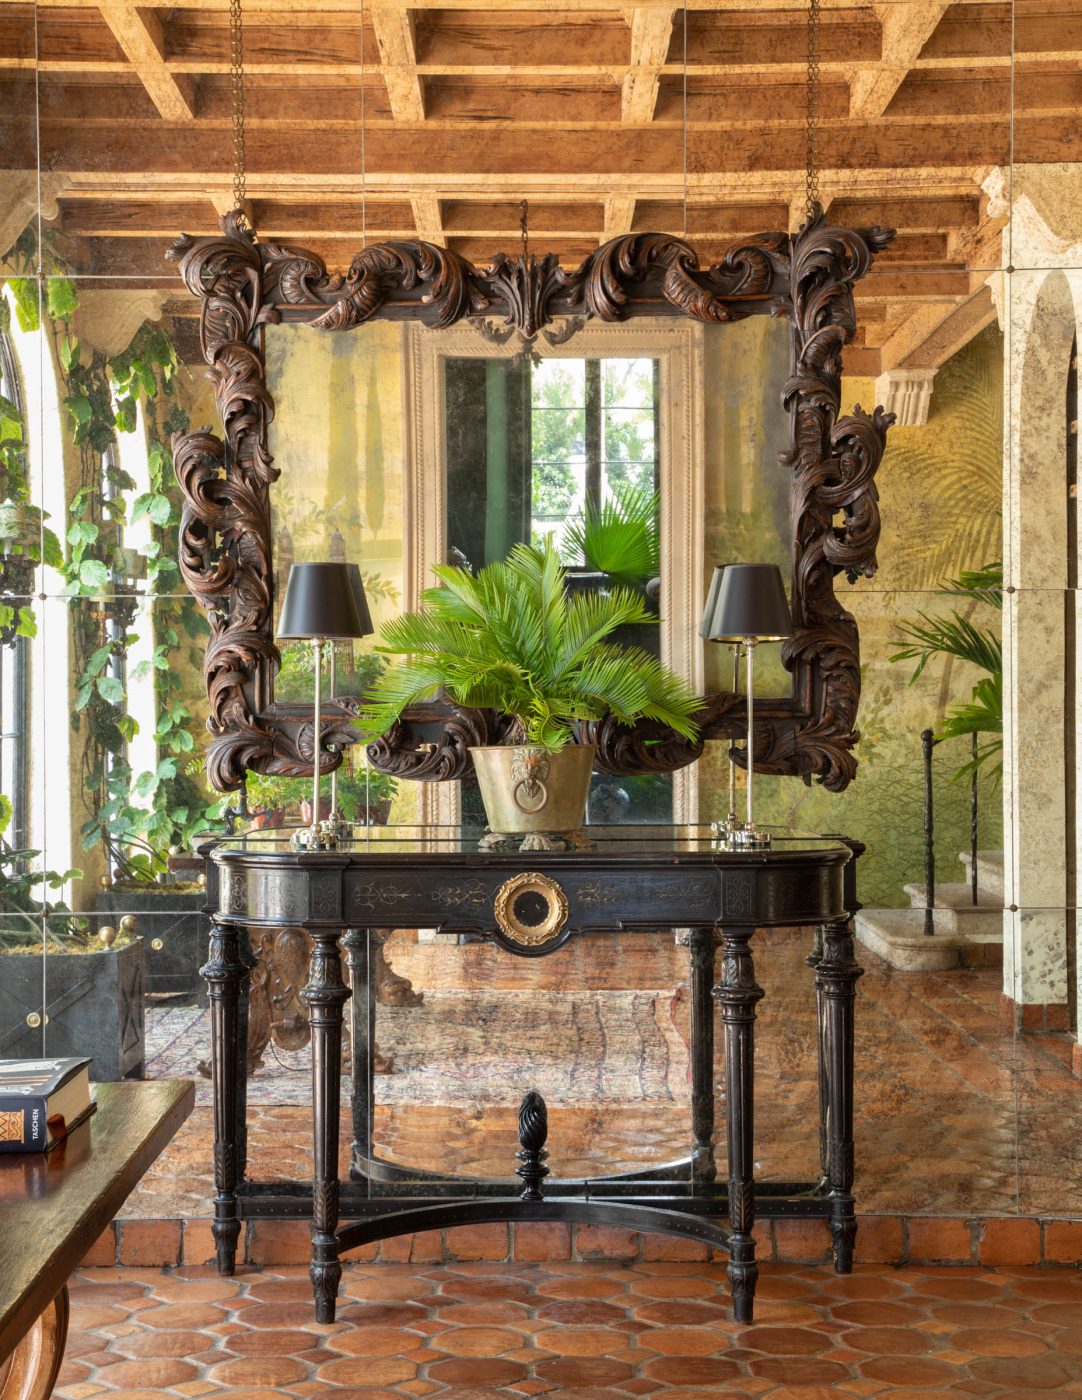 An antique-mirrored wall in the stair hall